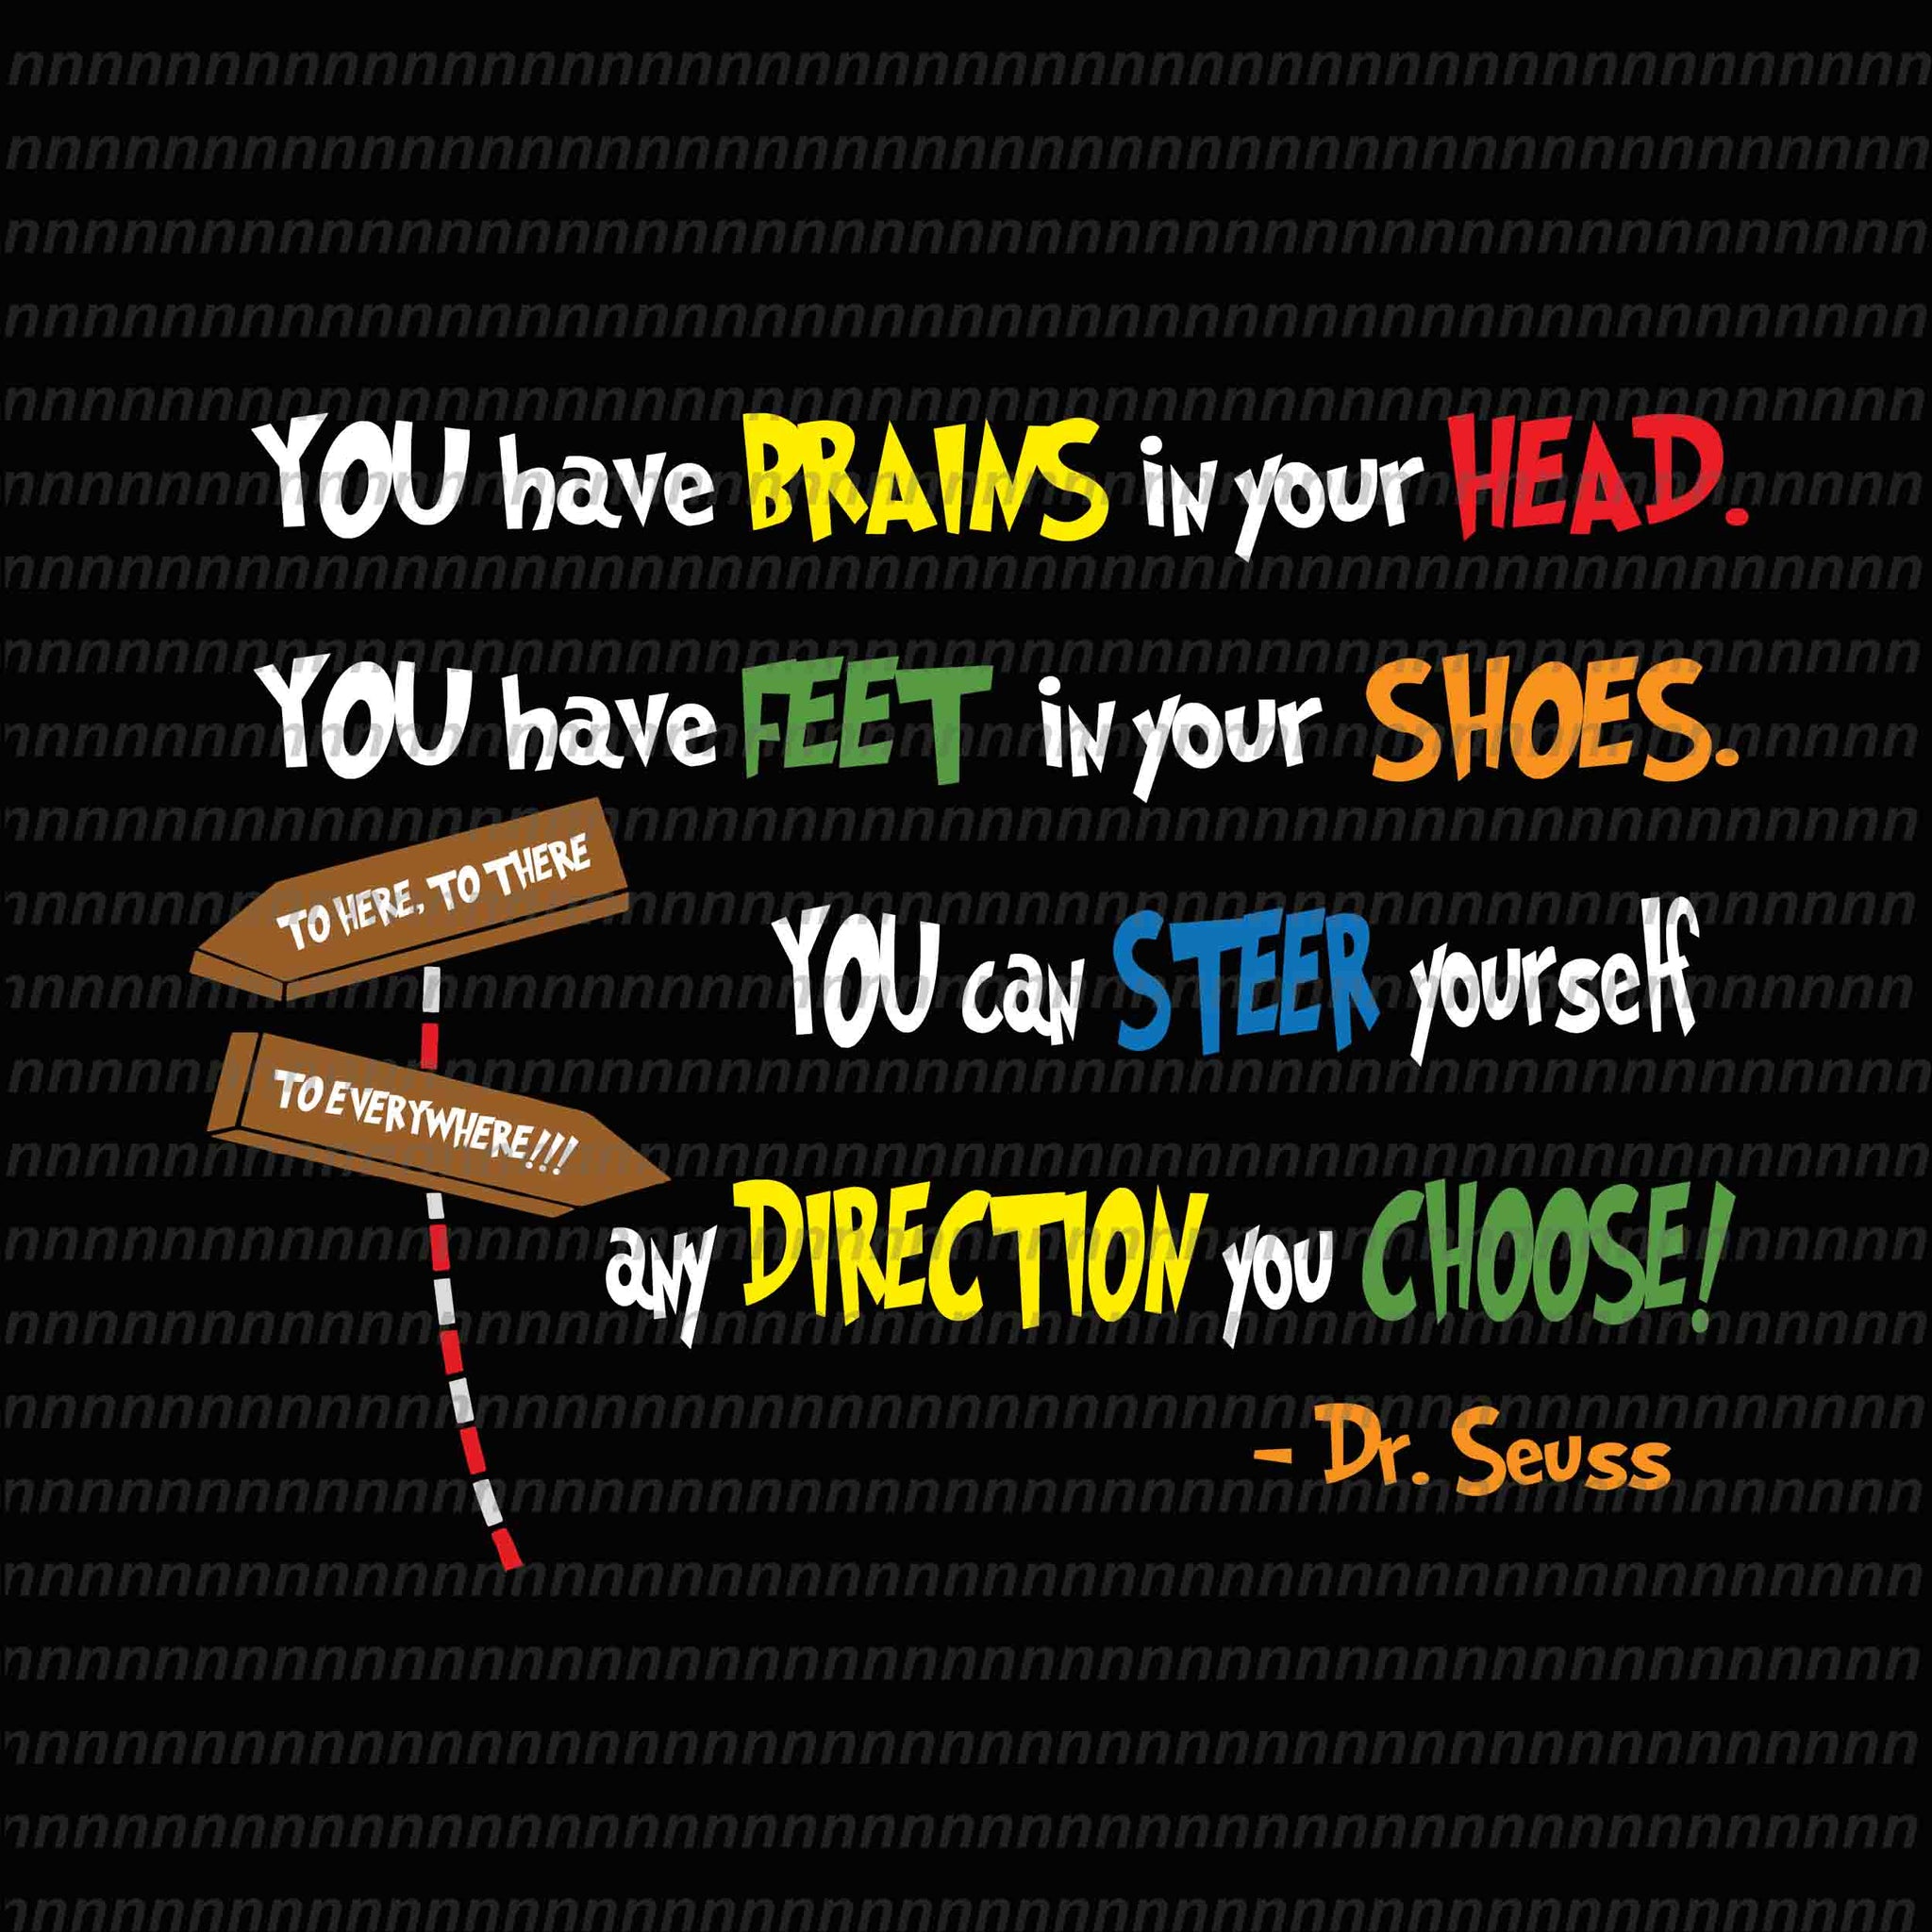 You have brains in your head, dr seuss vector, dr seuss quote, dr seuss design, Cat in the hat svg, thing 1 thing 2 thing 3, svg, png, dxf, eps file